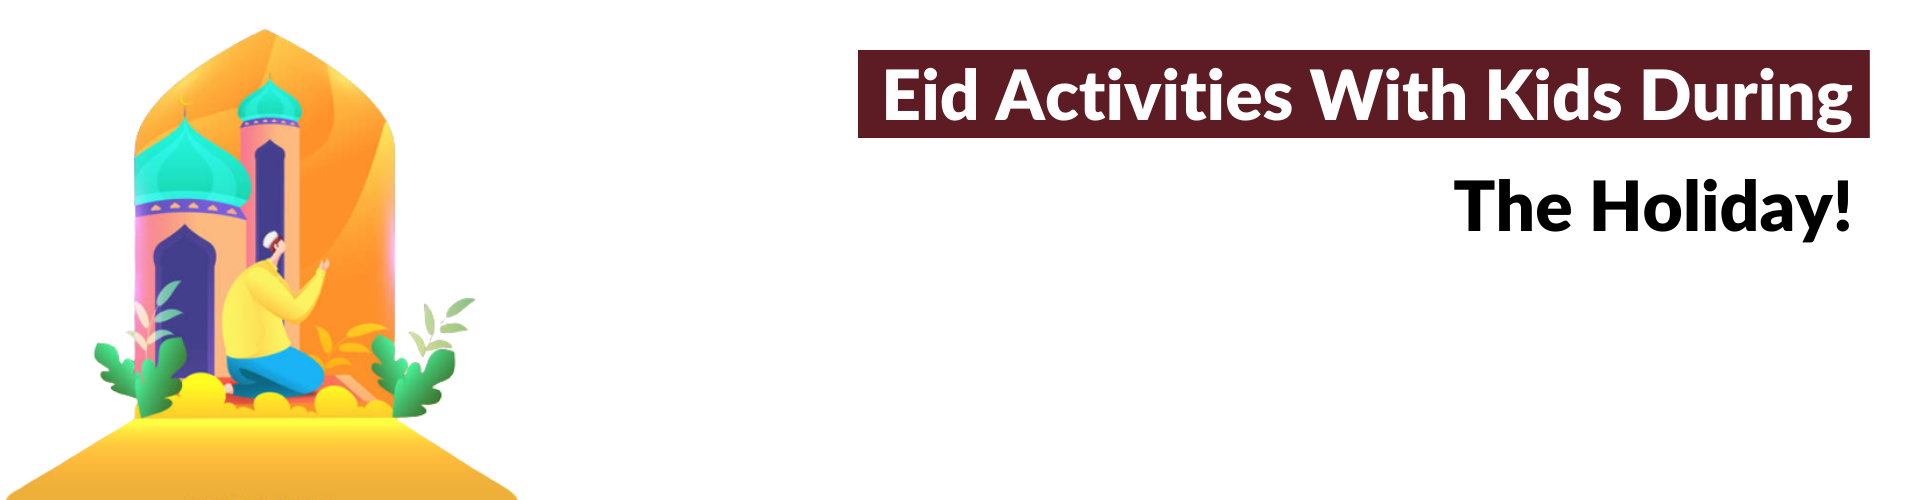 Activities To Enjoy With Kids During This Eid-ul-Fitr!